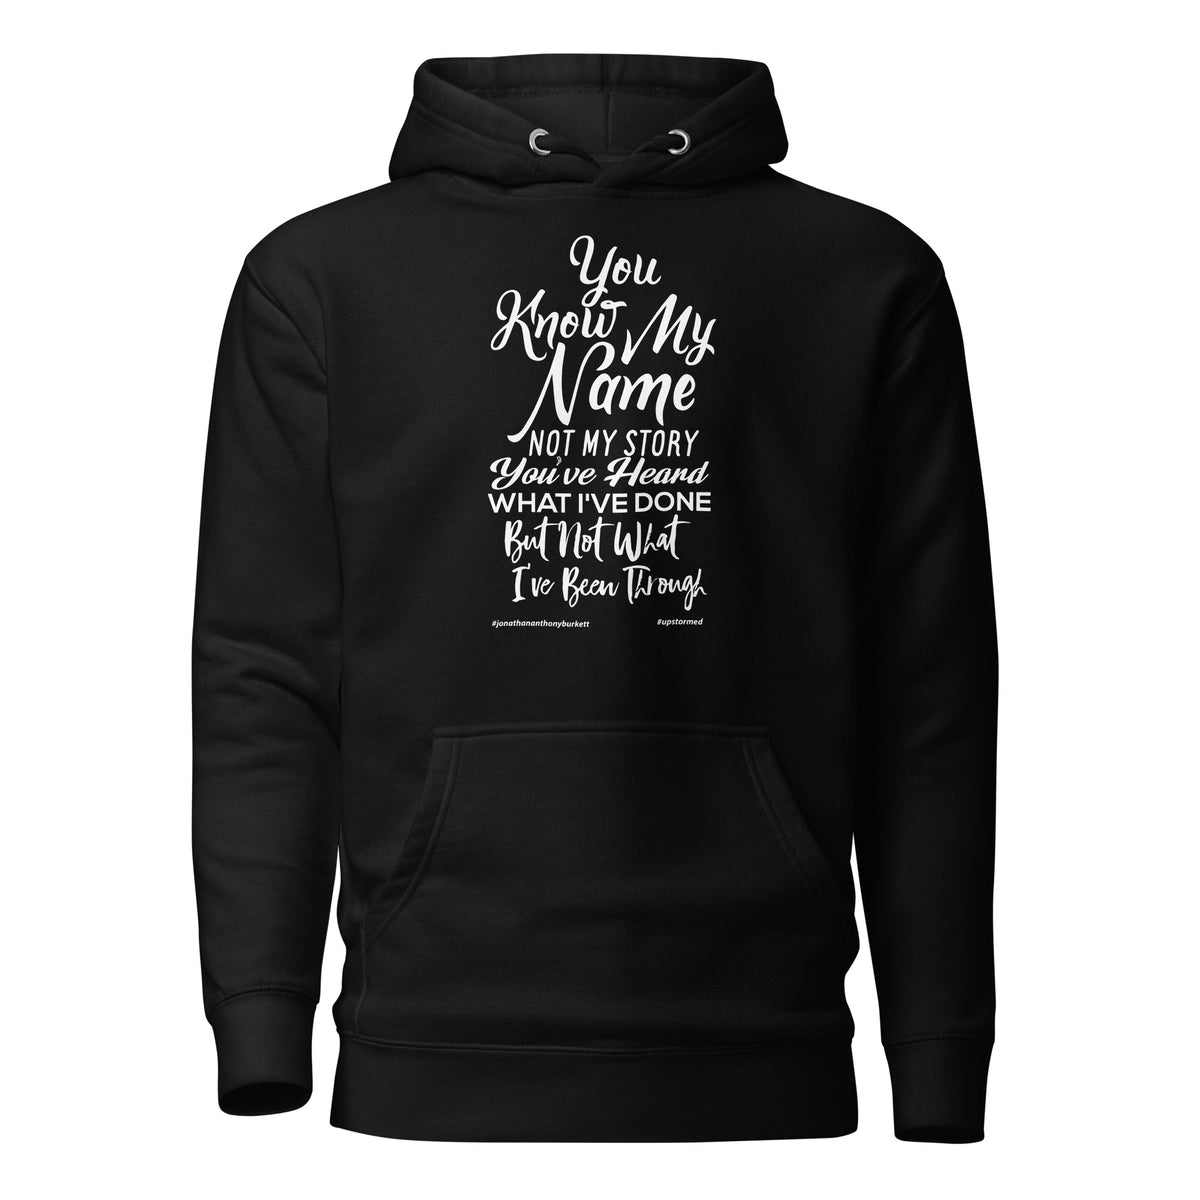 You Know My Name, Not My Story Upstormed Hoodie